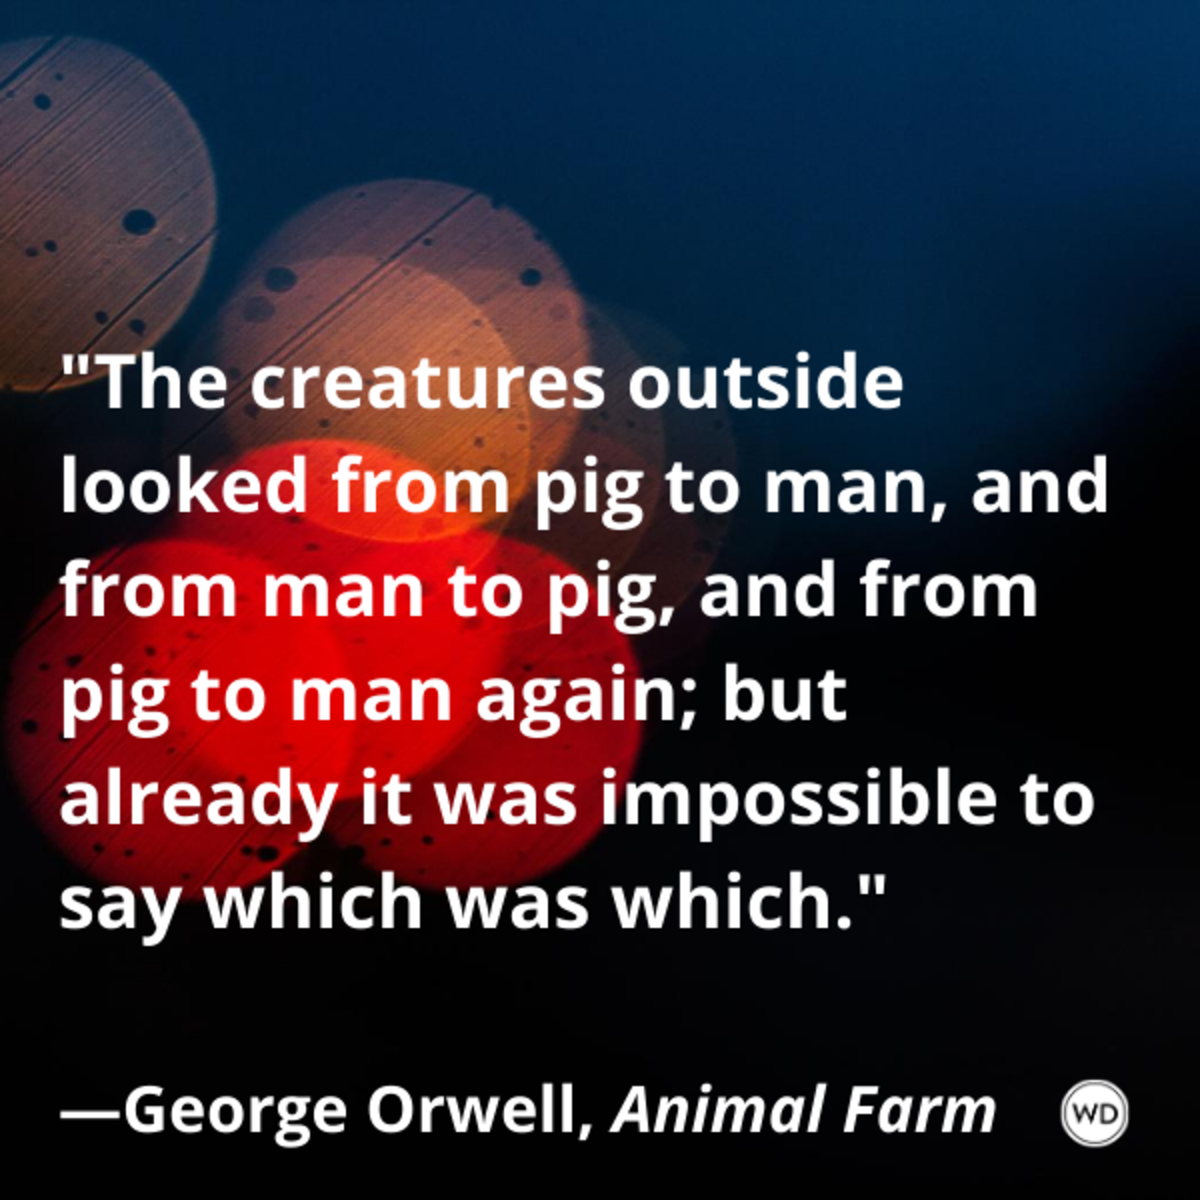 animal_farm_by_george_orwell_quotes_the_creatures_outside_looked_from_pig_to_man_and_from_man_to_pig_and_from_pig_to_man_again_but_already_it_was_impossible_to_say_which_was_which